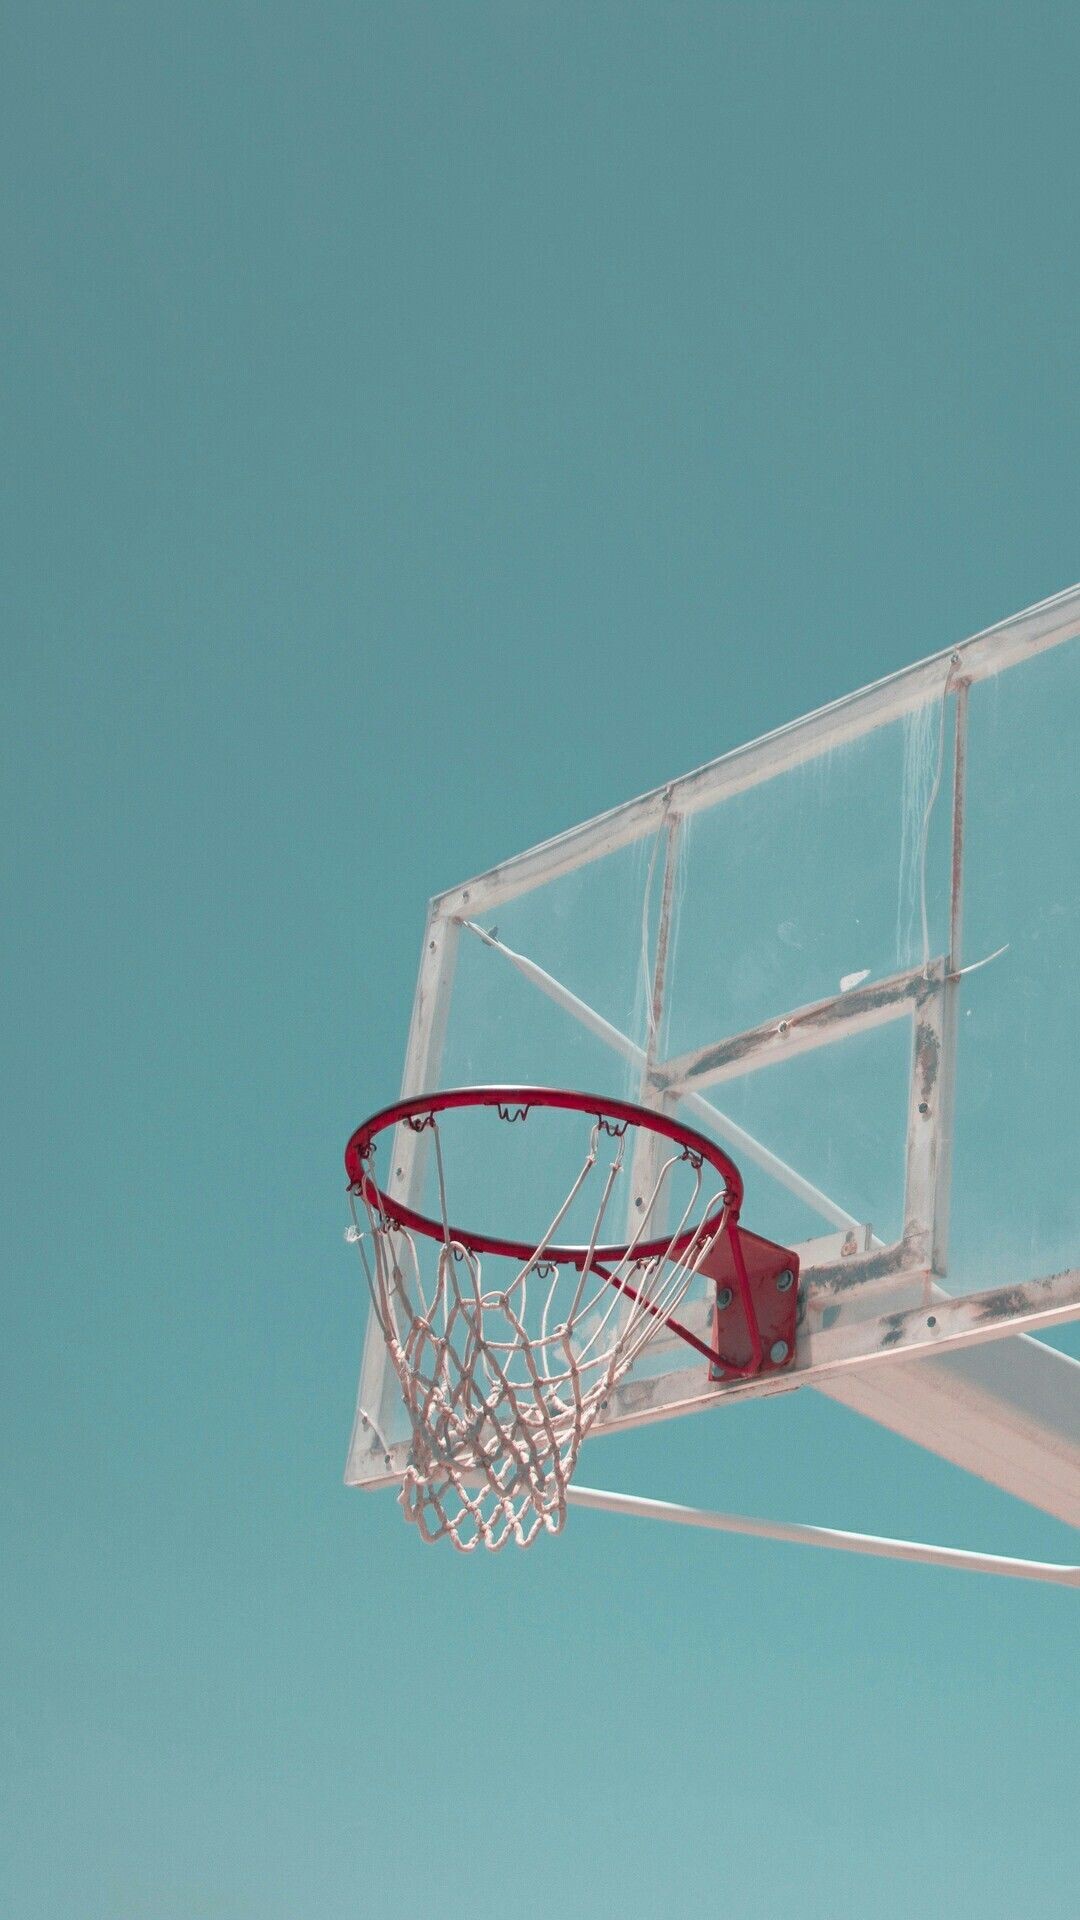 Goal (Sports): Professional hoop with backboard, A raised vertical board with an attached basket consisting of a net suspended from a hoop. 1080x1920 Full HD Background.